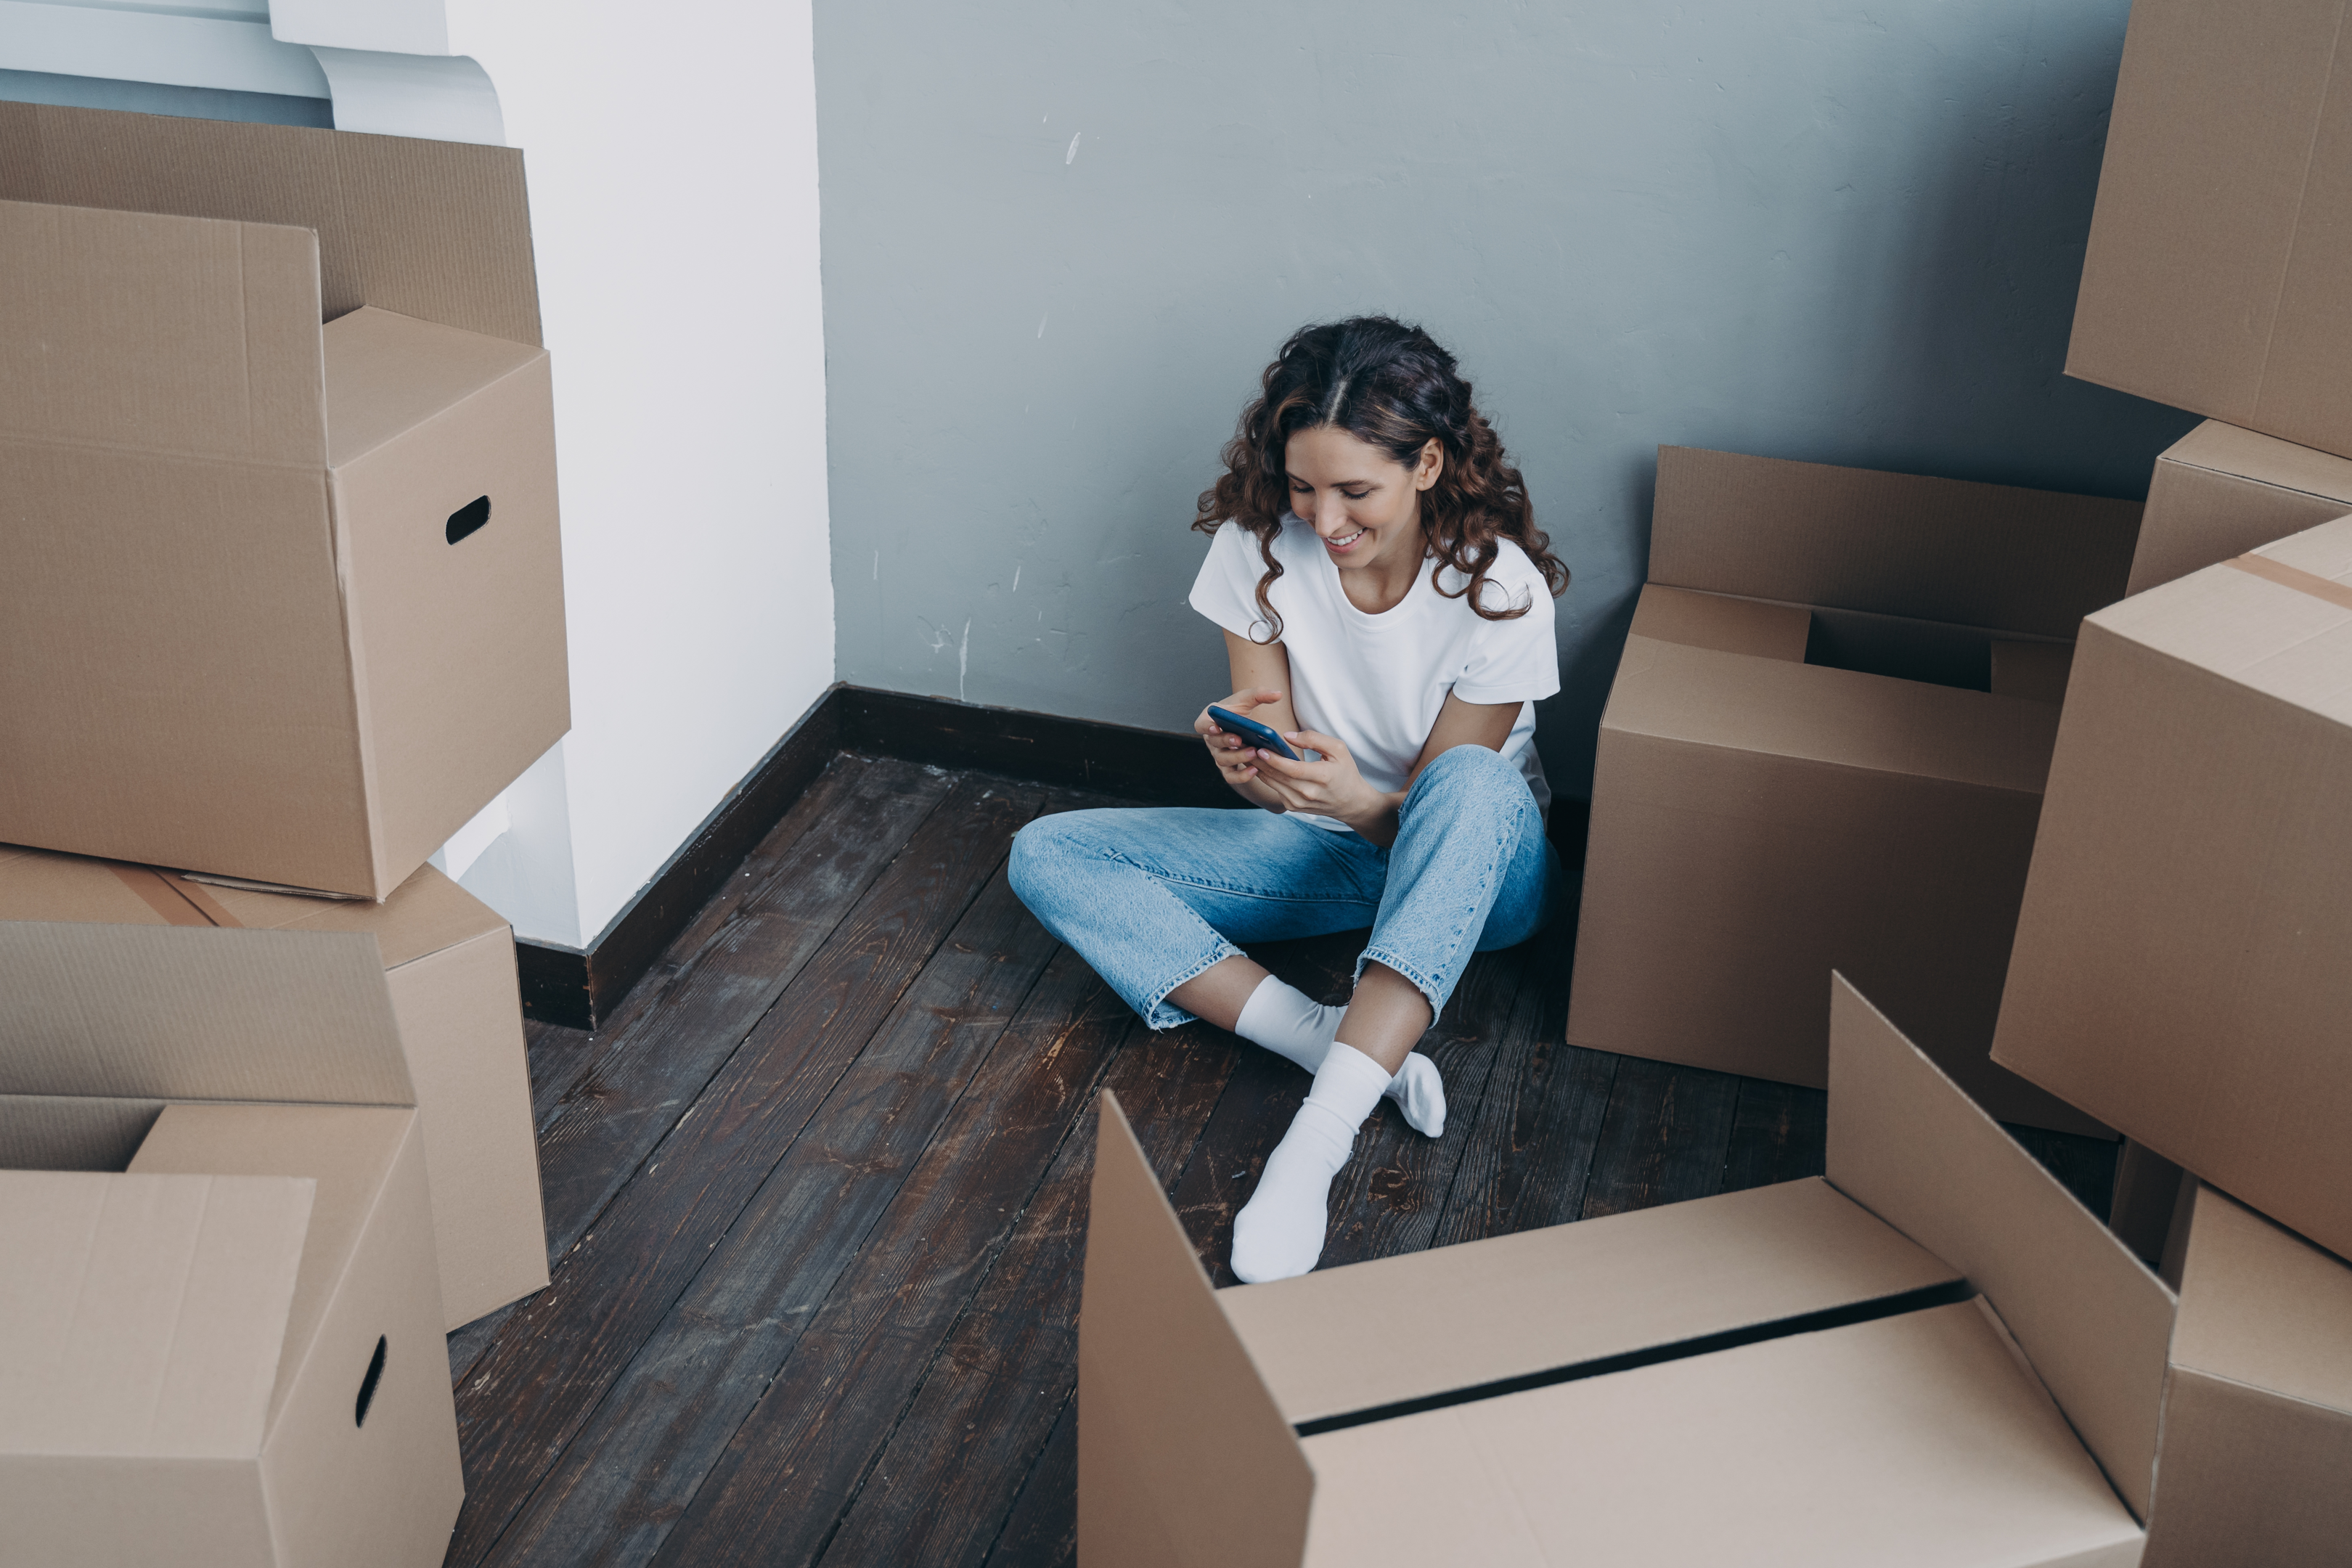 Saying goodbye to your current residence? Understanding California landlords laws regarding the 60-day notice is essential. Explore other dwelling unit options while ensuring a smooth transition and avoiding lease violation